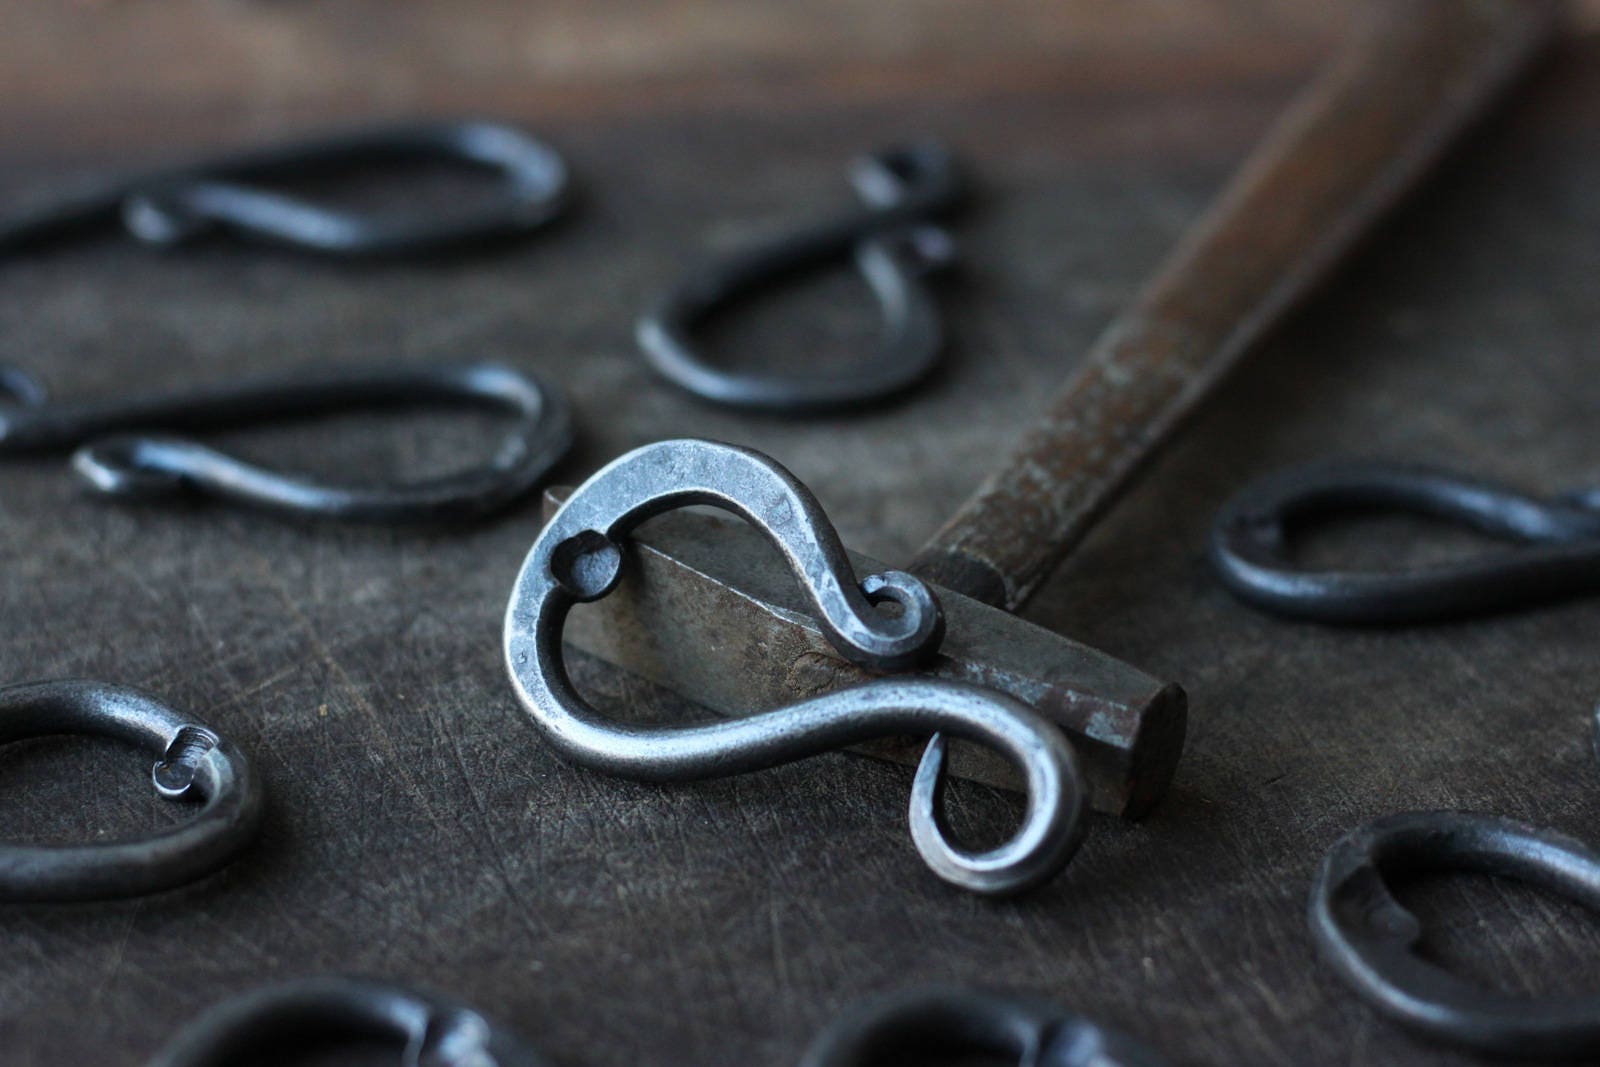 50 Personalized Bottle Openers Blacksmith Hand Forged Handmade Wedding Favors Multiple Styles Available 2